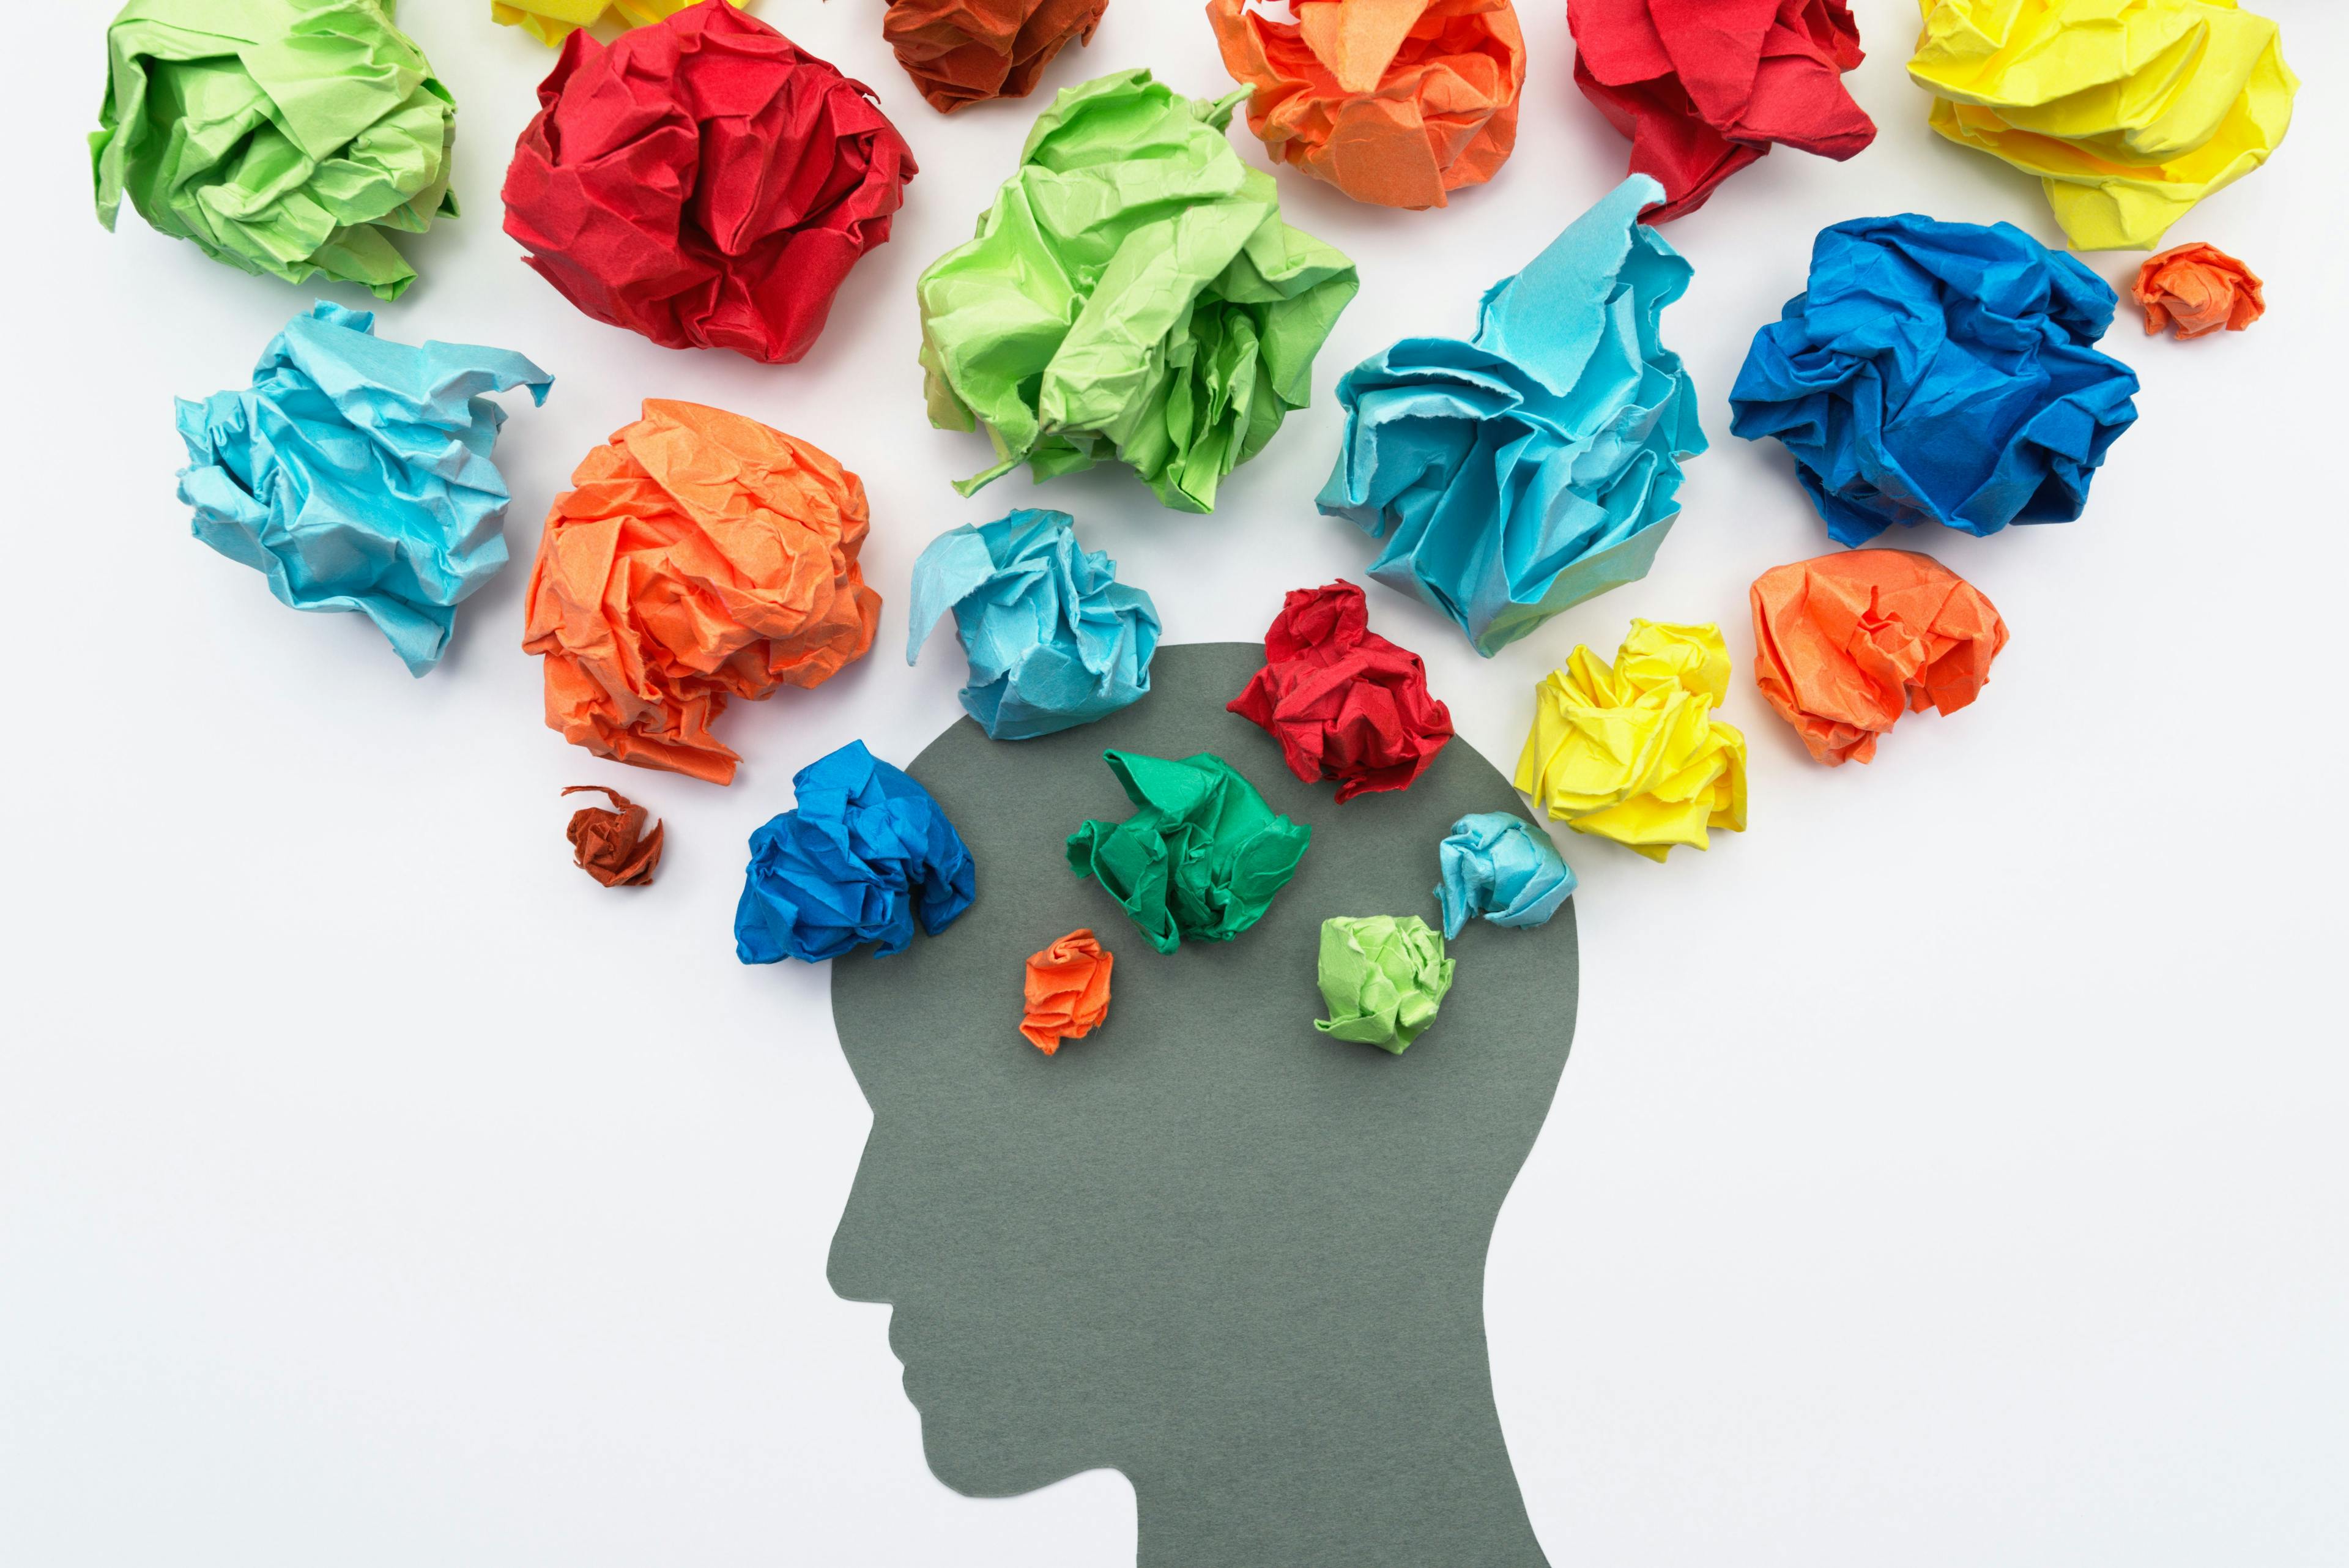 Mental health image. Various emotion and mind. Waste paper and head silhouette. | Image Credit: tadamichi - stock.adobe.com